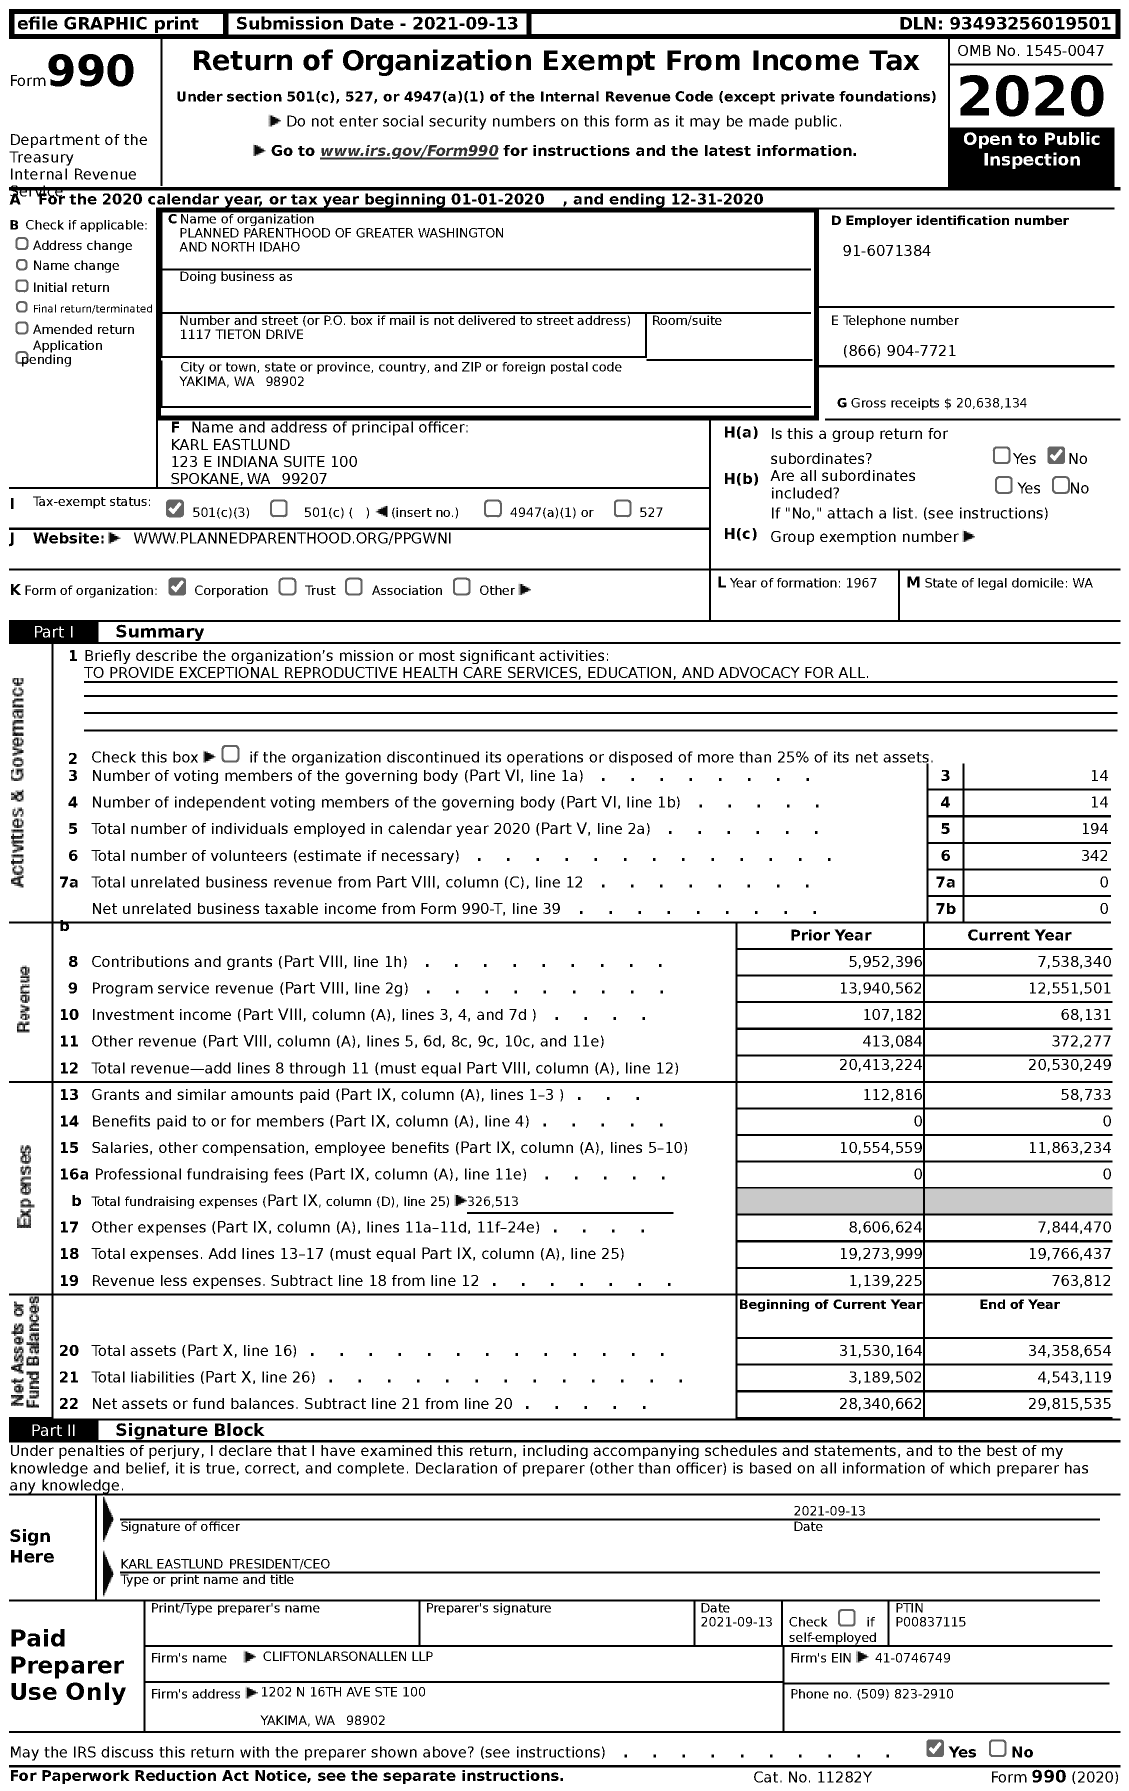 Image of first page of 2020 Form 990 for Planned Parenthood of Greater Washington and North Idaho (PPGWNI)